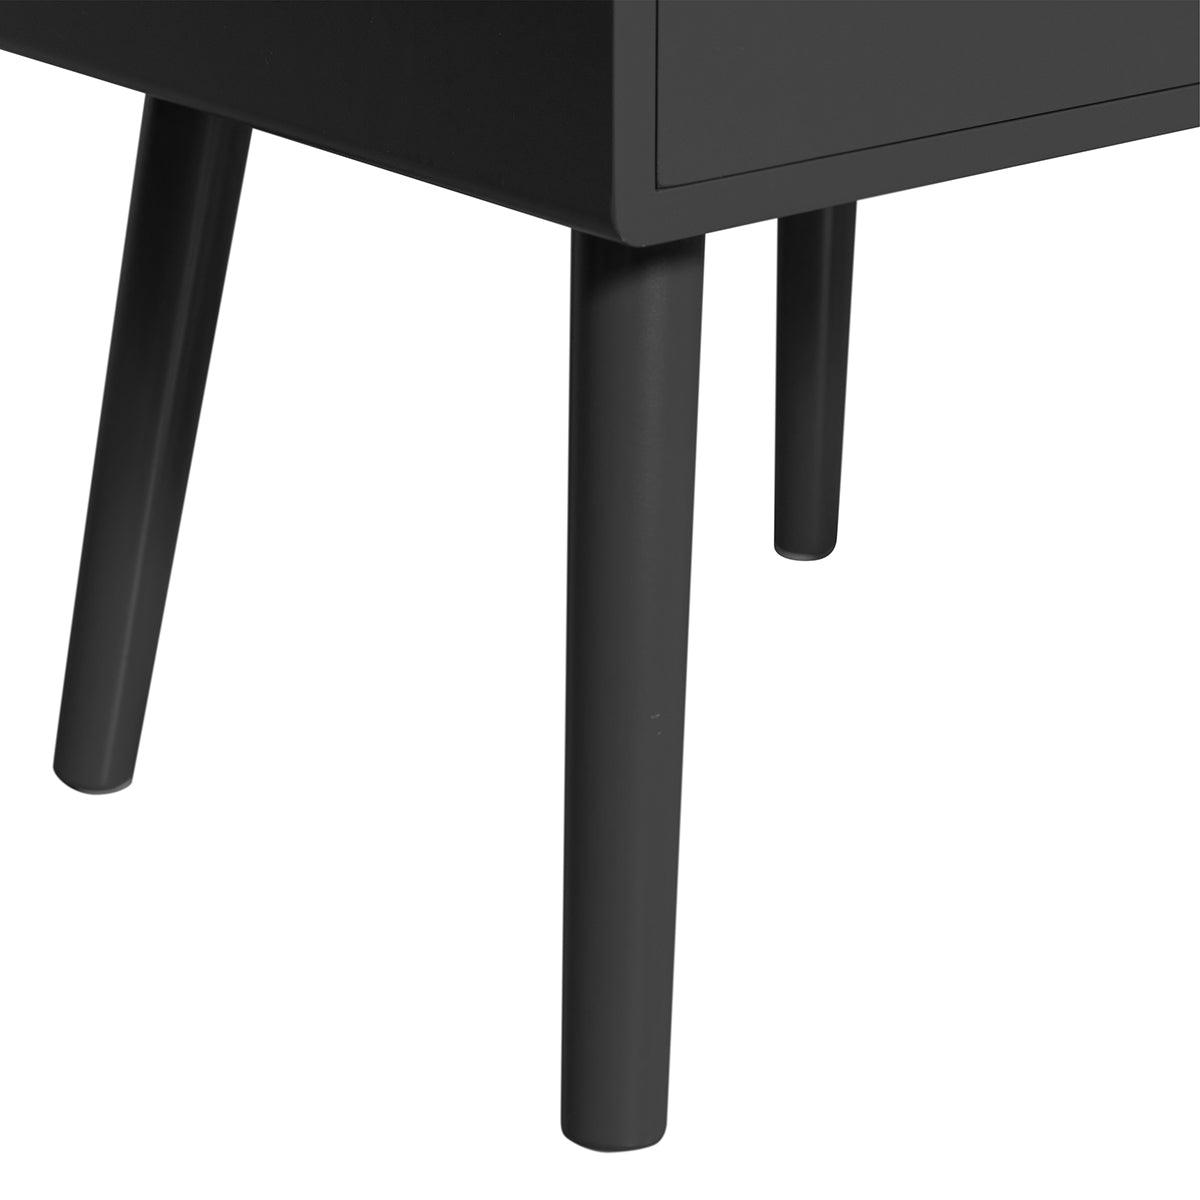 Ozzy Wood Night Stand - WOO .Design